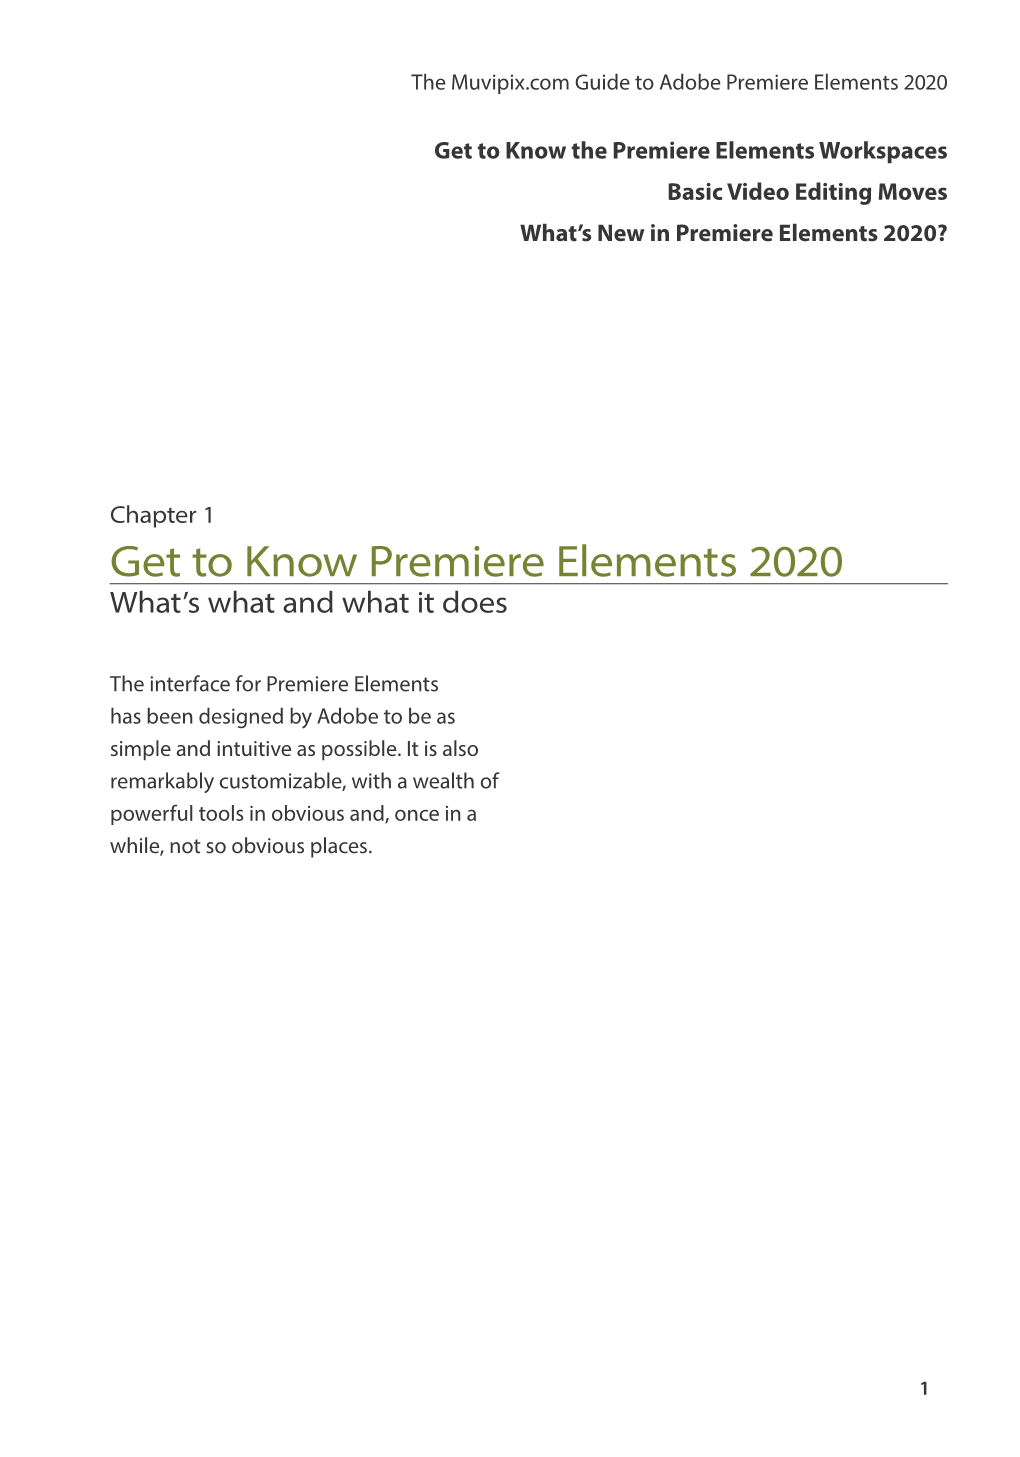 Get to Know Premiere Elements 2020 What’S What and What It Does